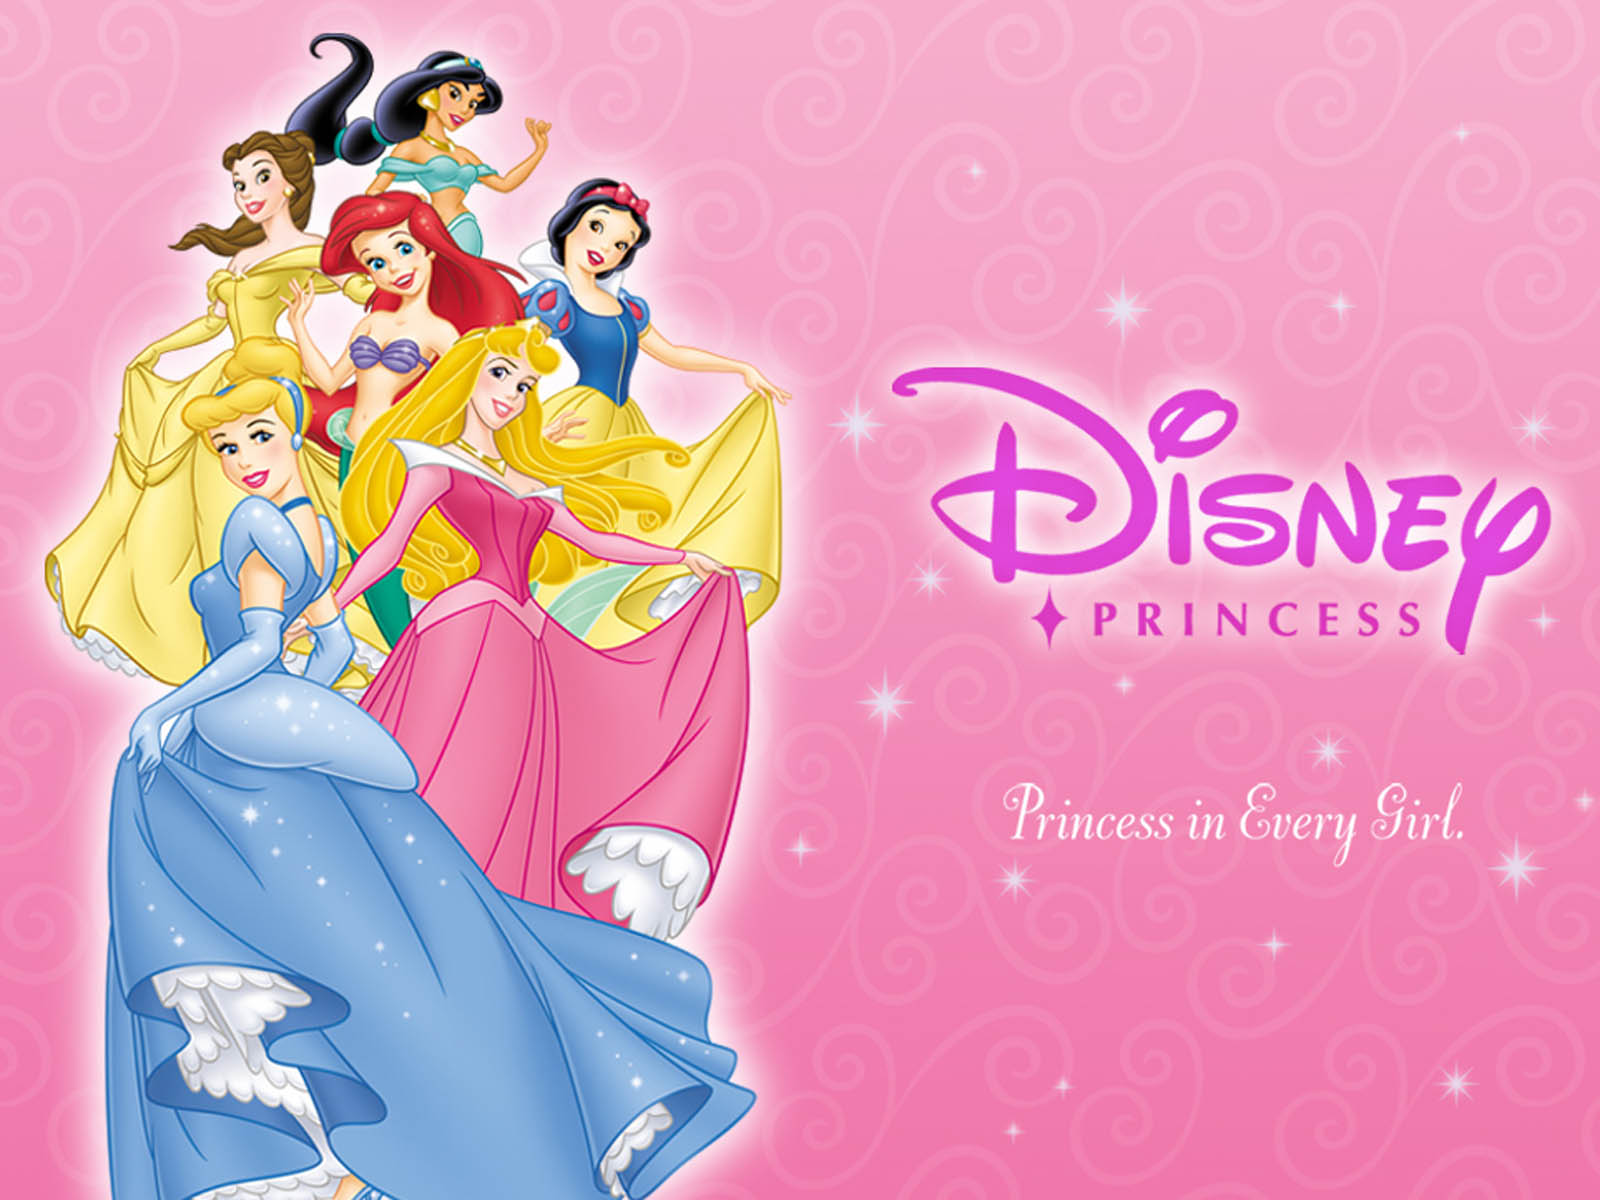 Tag Disney Princess Wallpapers Backgrounds Paos Images and